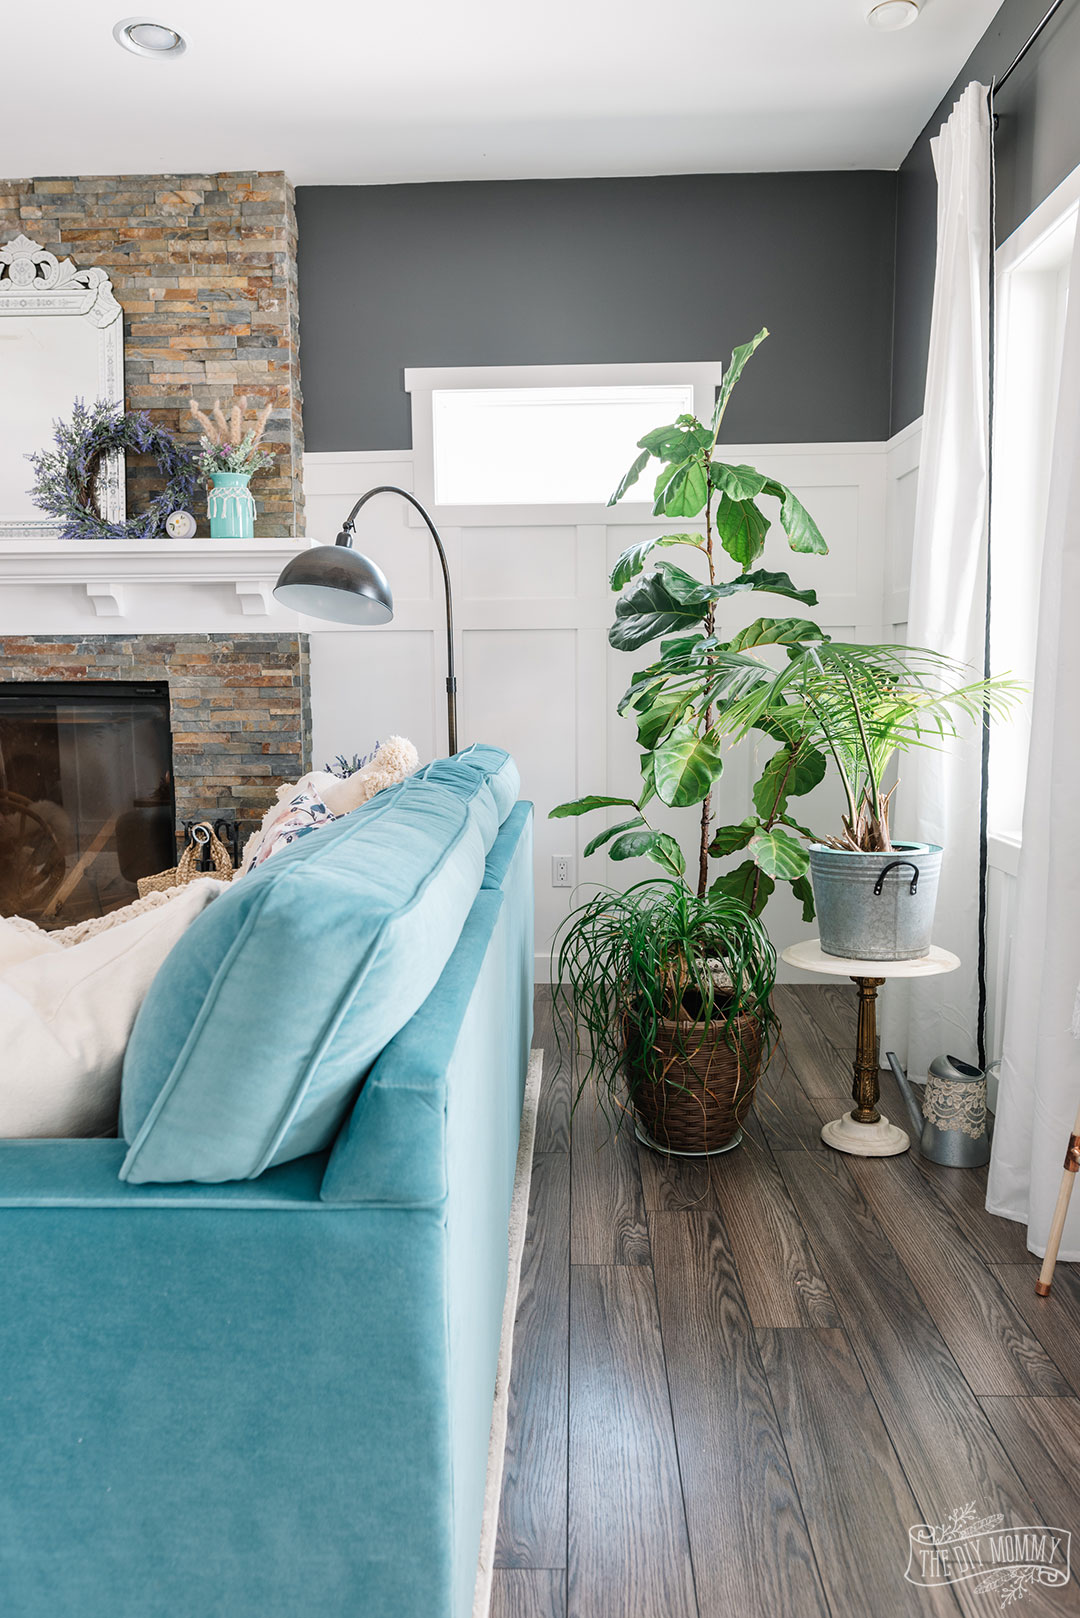 Learn how to make your home feel calm and safe this Spring by while what you have